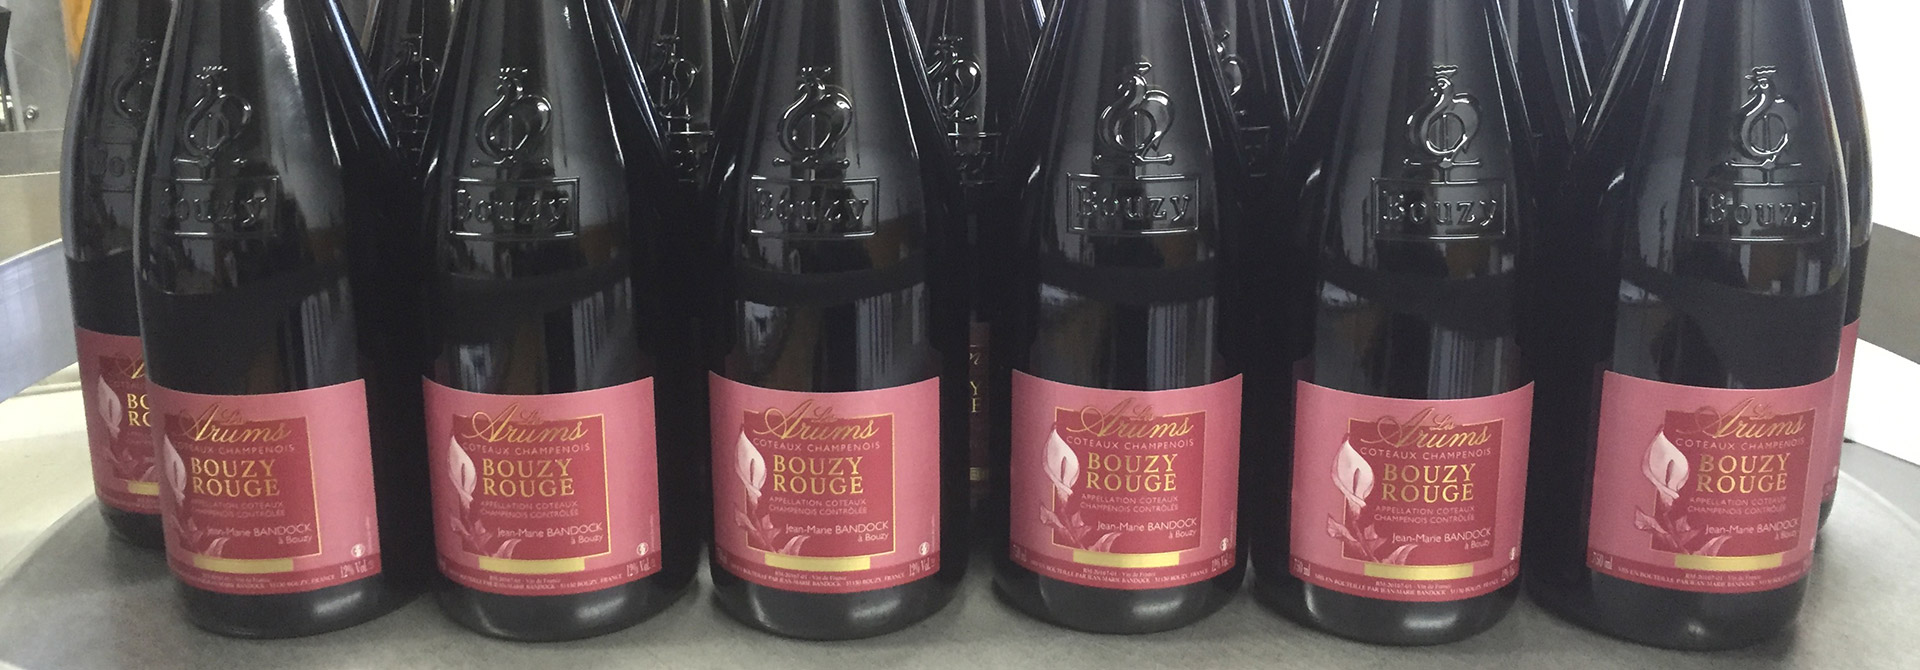 Several rows of the same bottle of Bouzy Rouge from Champagne Bandock